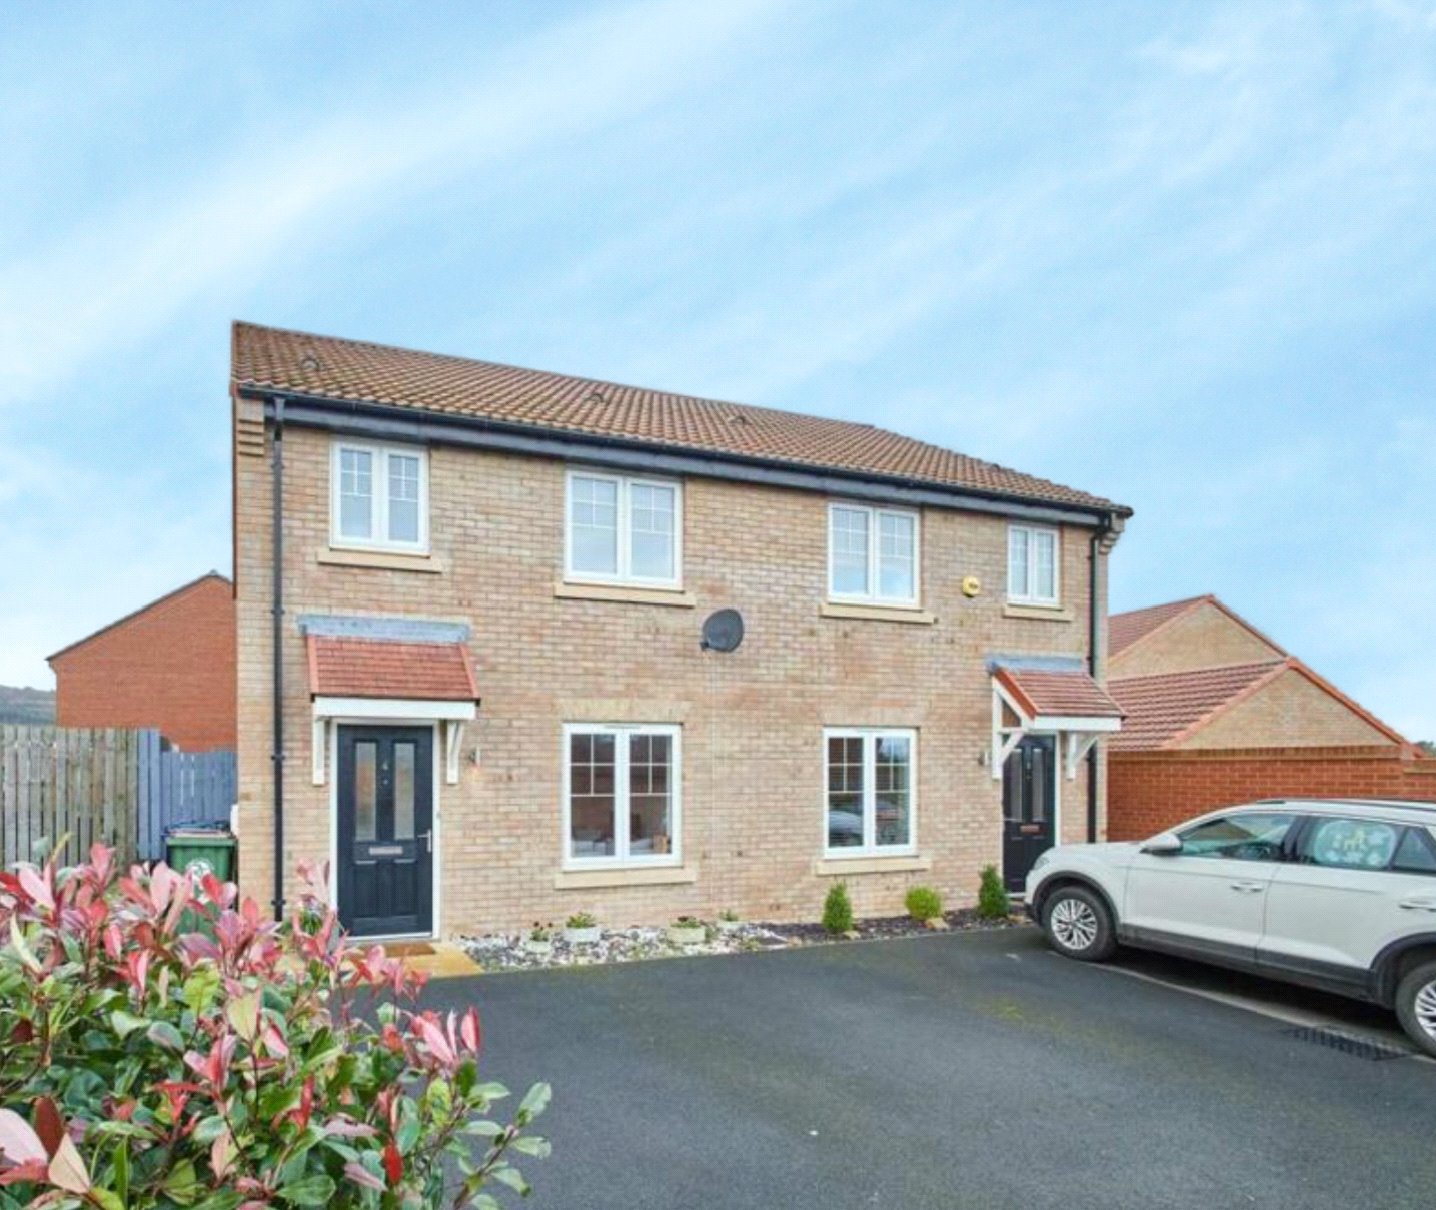 3 bed house for sale in Pennyman Close, Saltburn-by-the-Sea 1